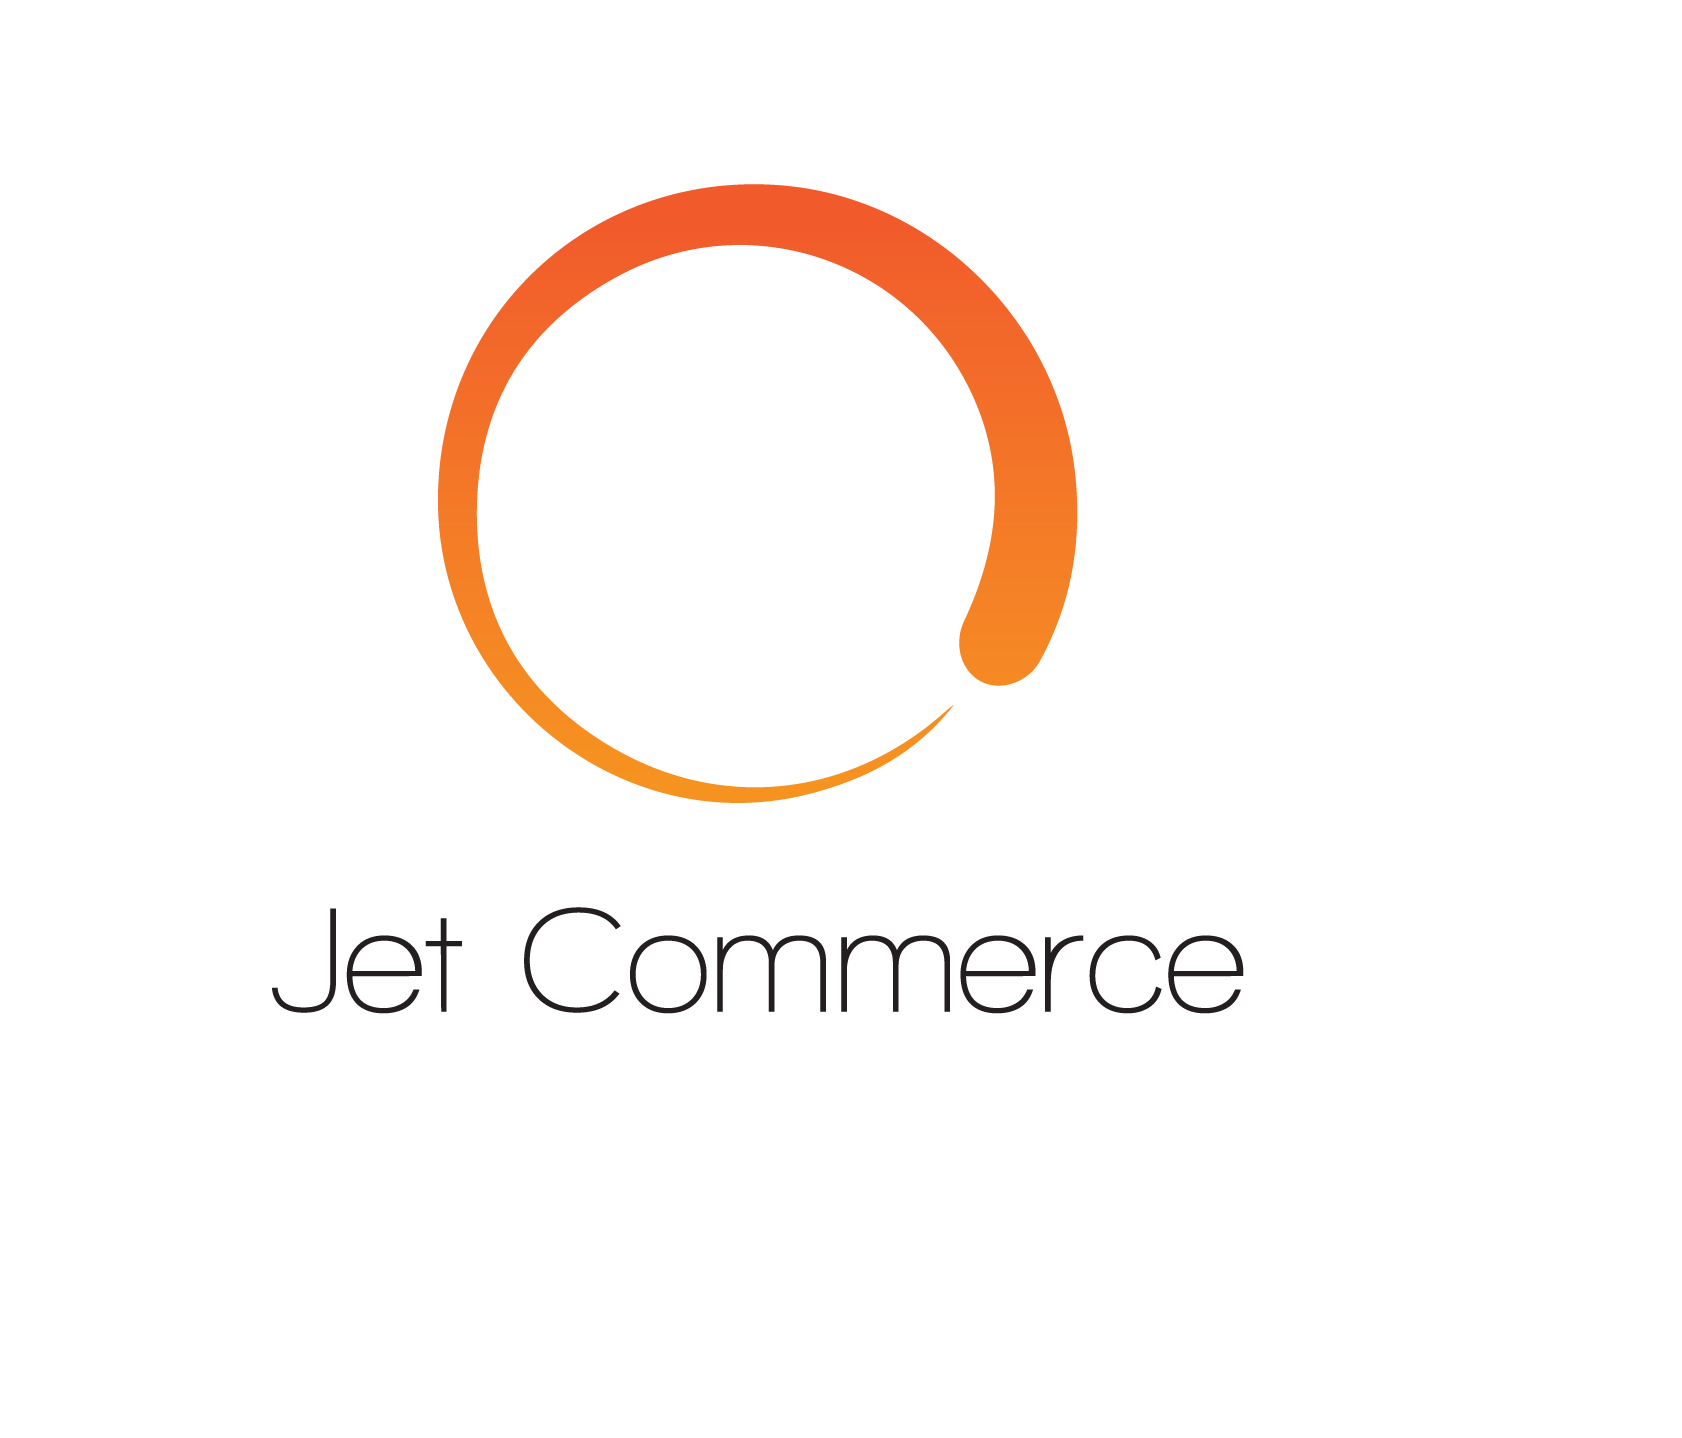 https://my.mncjobz.com/company/global-jet-commerce-sdn-bhd-1631239224